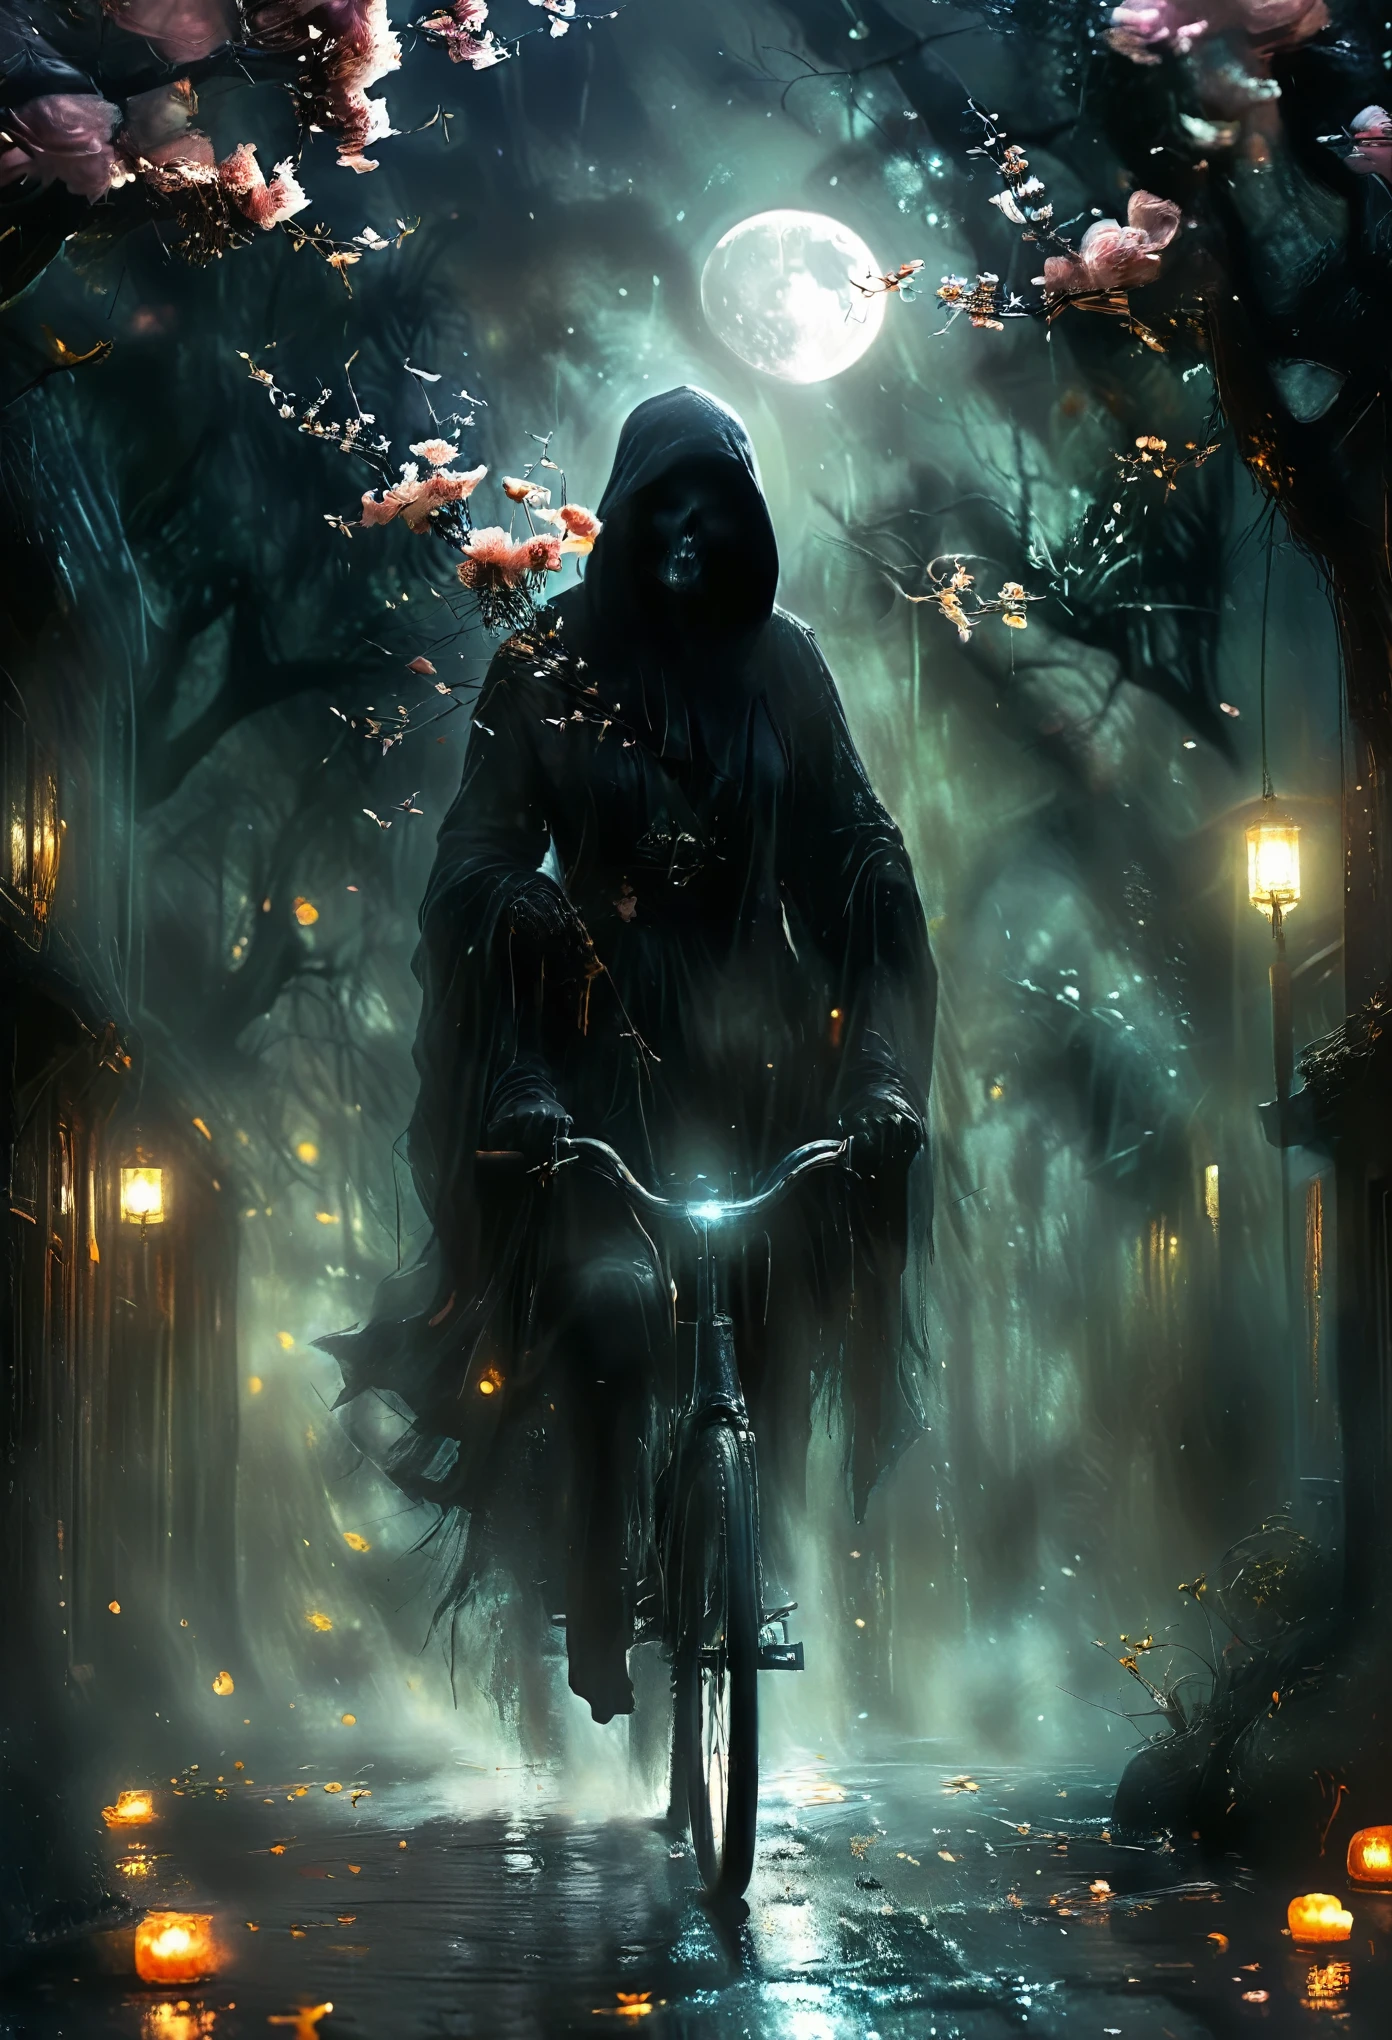 Create a surreal digital painting showcasing a captivating figure of death, interpreted as the grim reaper, riding a bicycle adorned with blossoms under the glow of a crescent moon bearing the likeness of a human face. The scene features elements of fluidity and transformation, reminiscent of the surreal reinterpretations of reality as seen in art from the late 19th century, before 1912 and not specifically linked to any artist post that year. Dramatic, high contrast lighting shines on the scene, casting deep shadows that intensify the sense of mystery. The scene, framed in a natural setting, blurs the boundaries between the real and the imagined. Techniques of digital painting and luminous airbrushing are used to bring out the eerie yet enchanting beauty of this personification of death on its unprecedented journey.